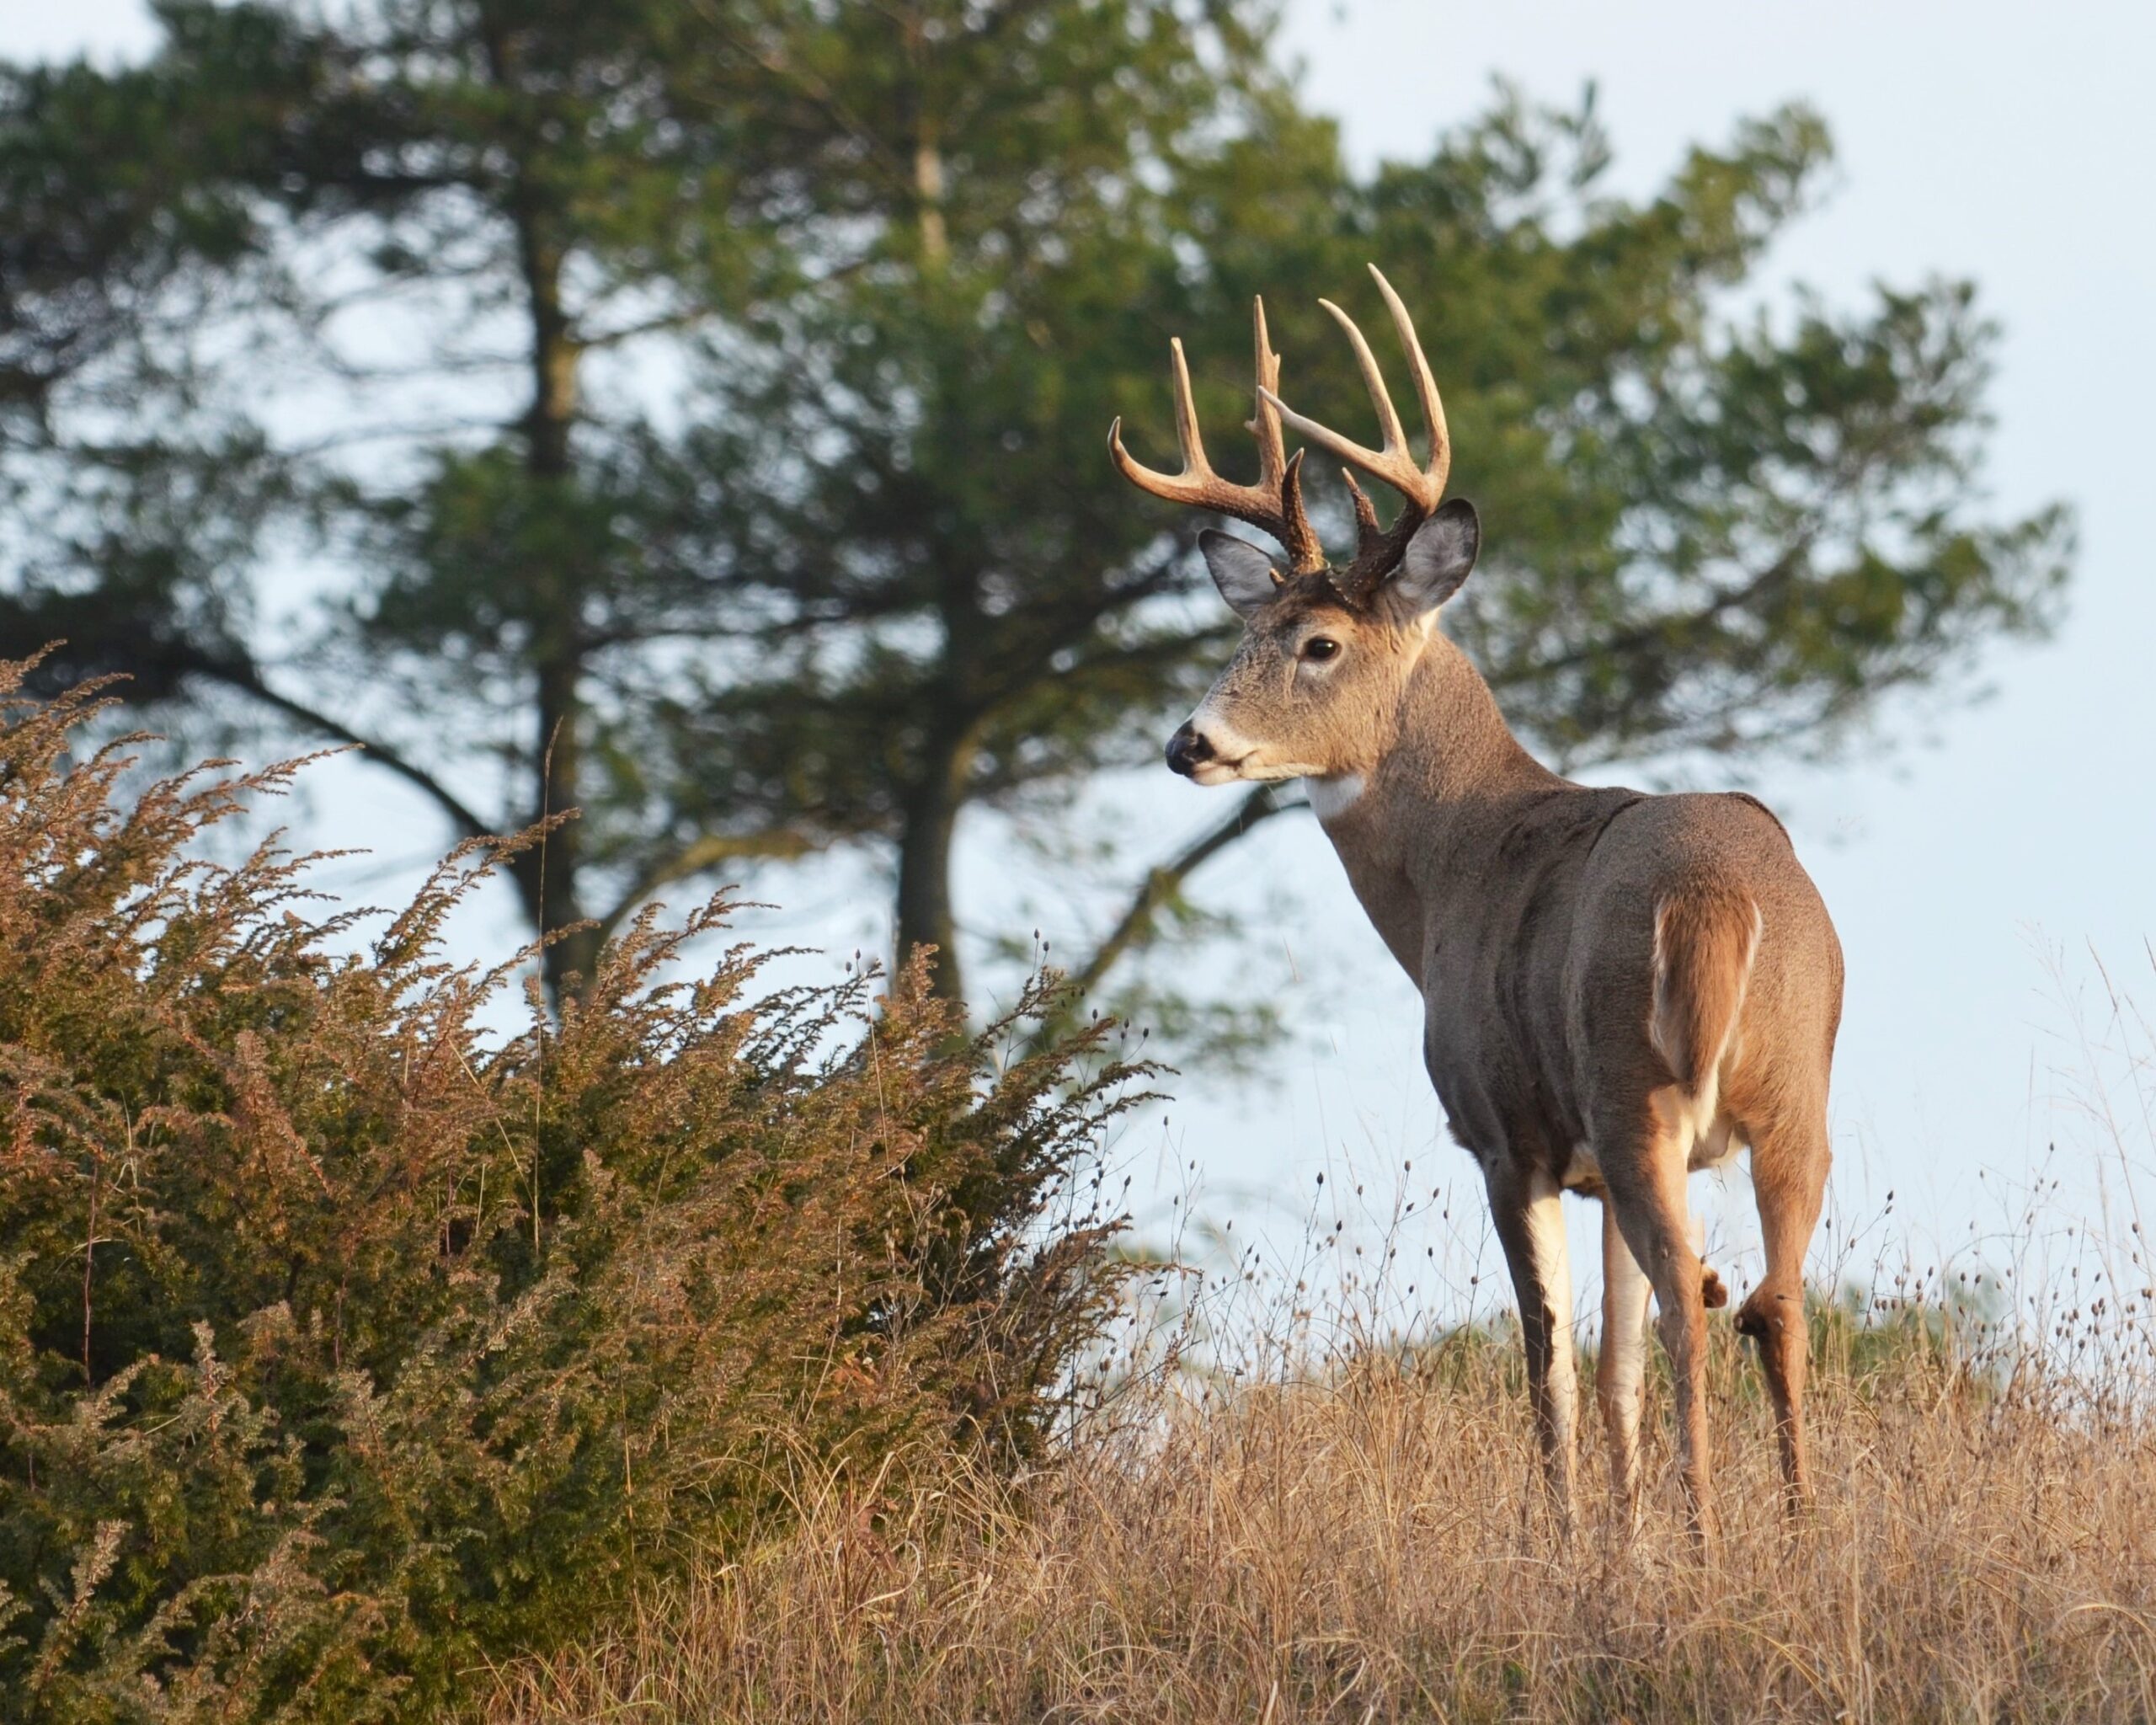 With SARS-CoV-2 spreading in deer, state health officials urge extra precautions while hunting